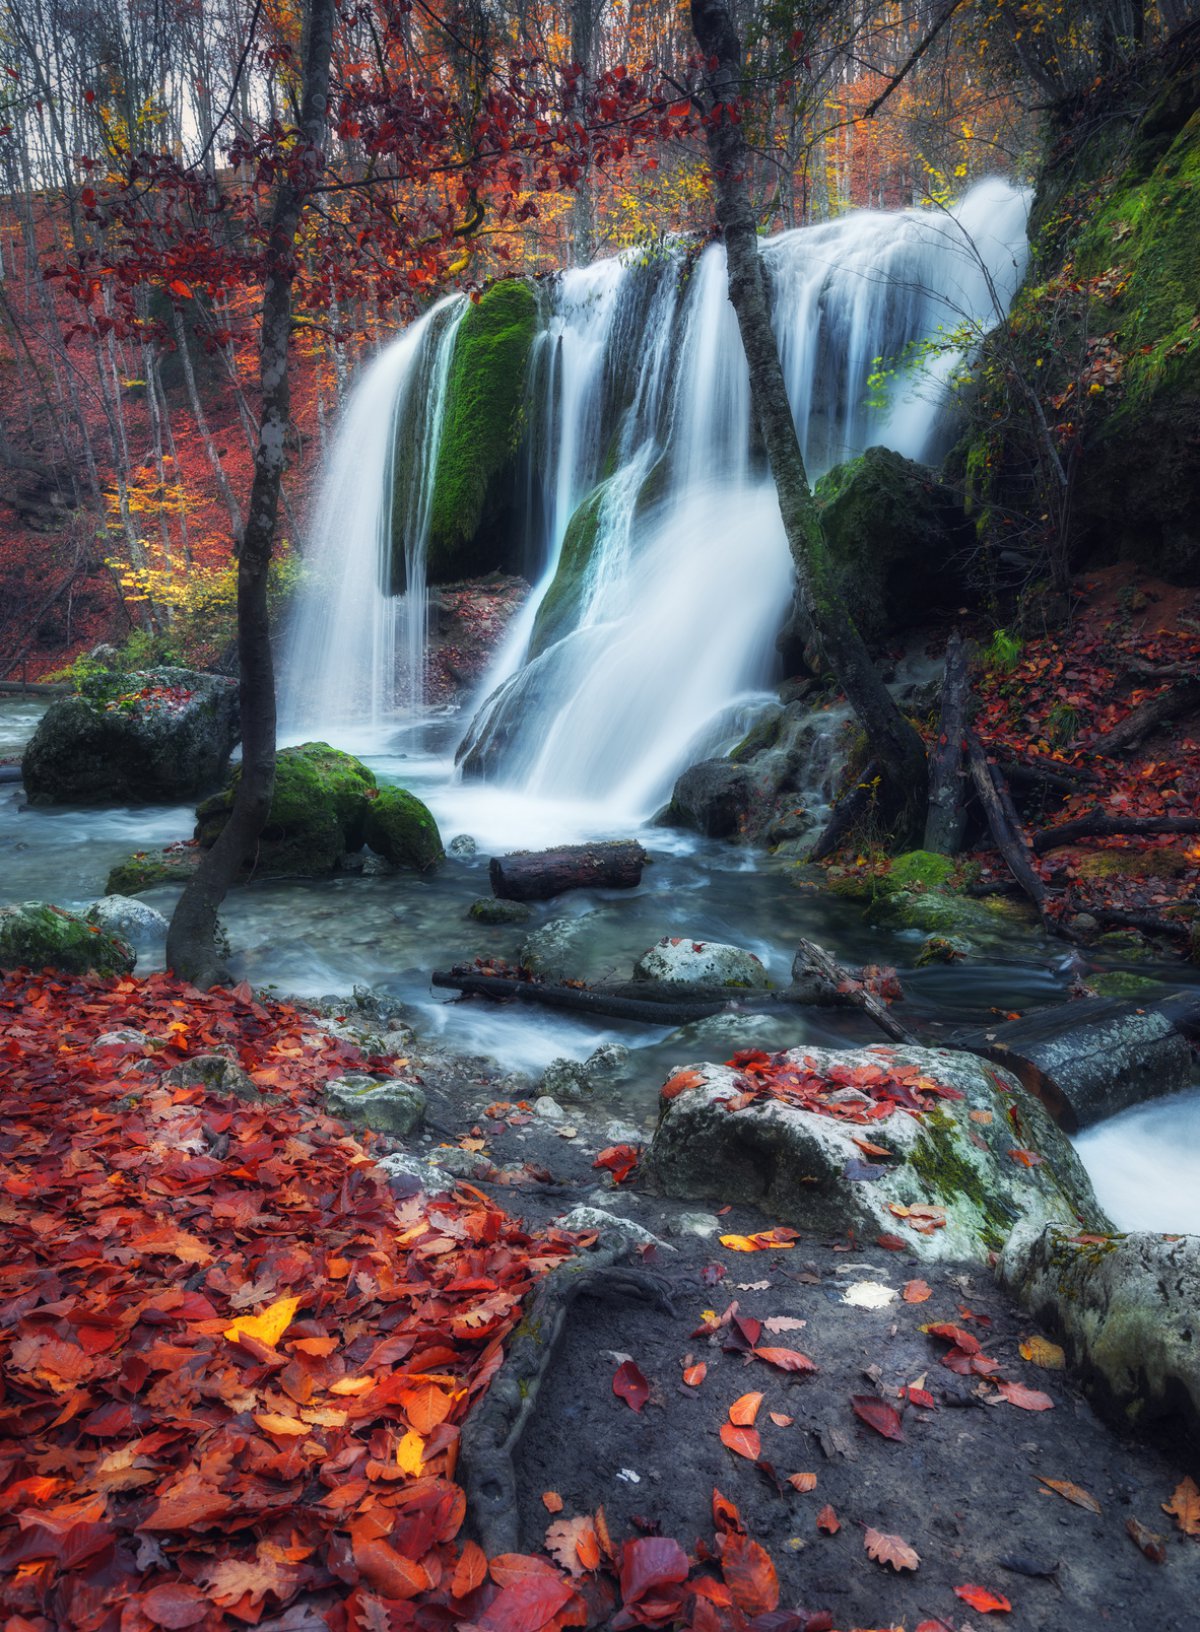 Mountain forest waterfall scenery picture